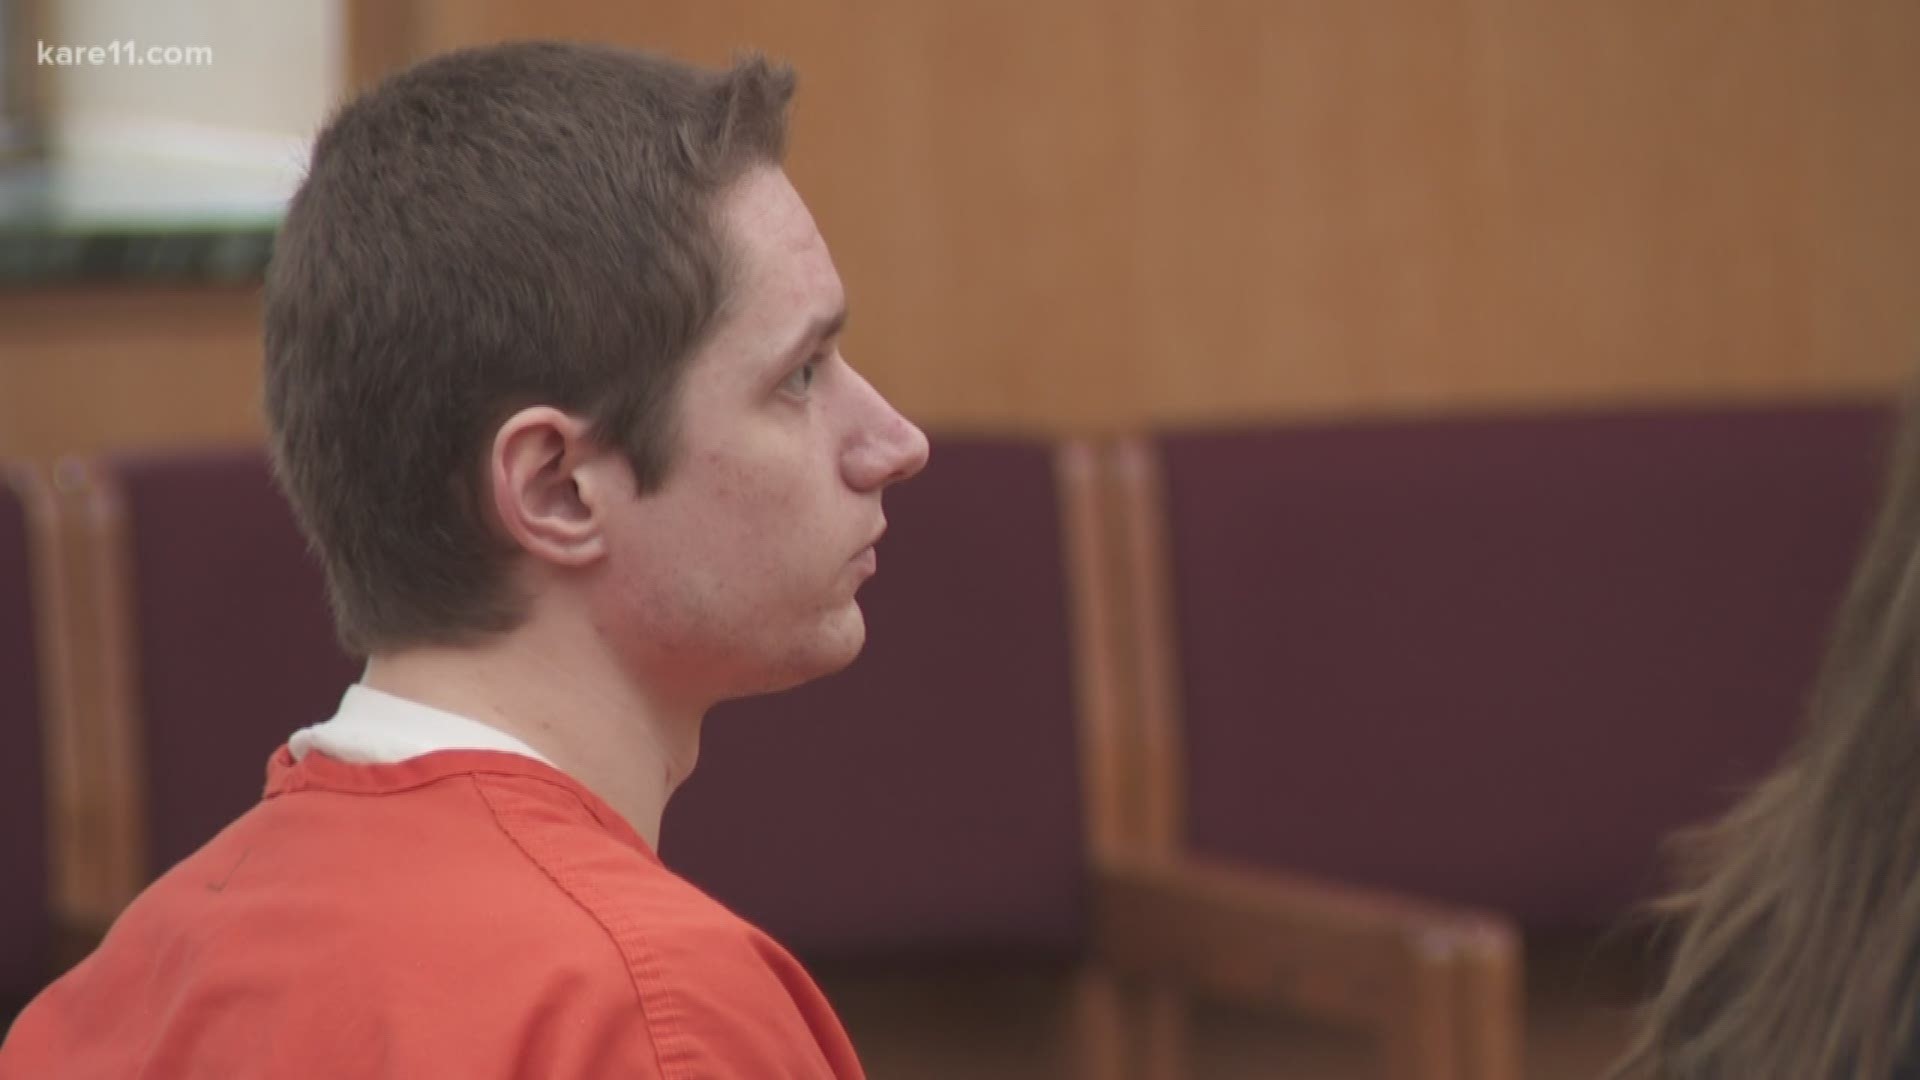 The judge ruled Colten Treu's prior charges can be presented before the jury in January but without any details.